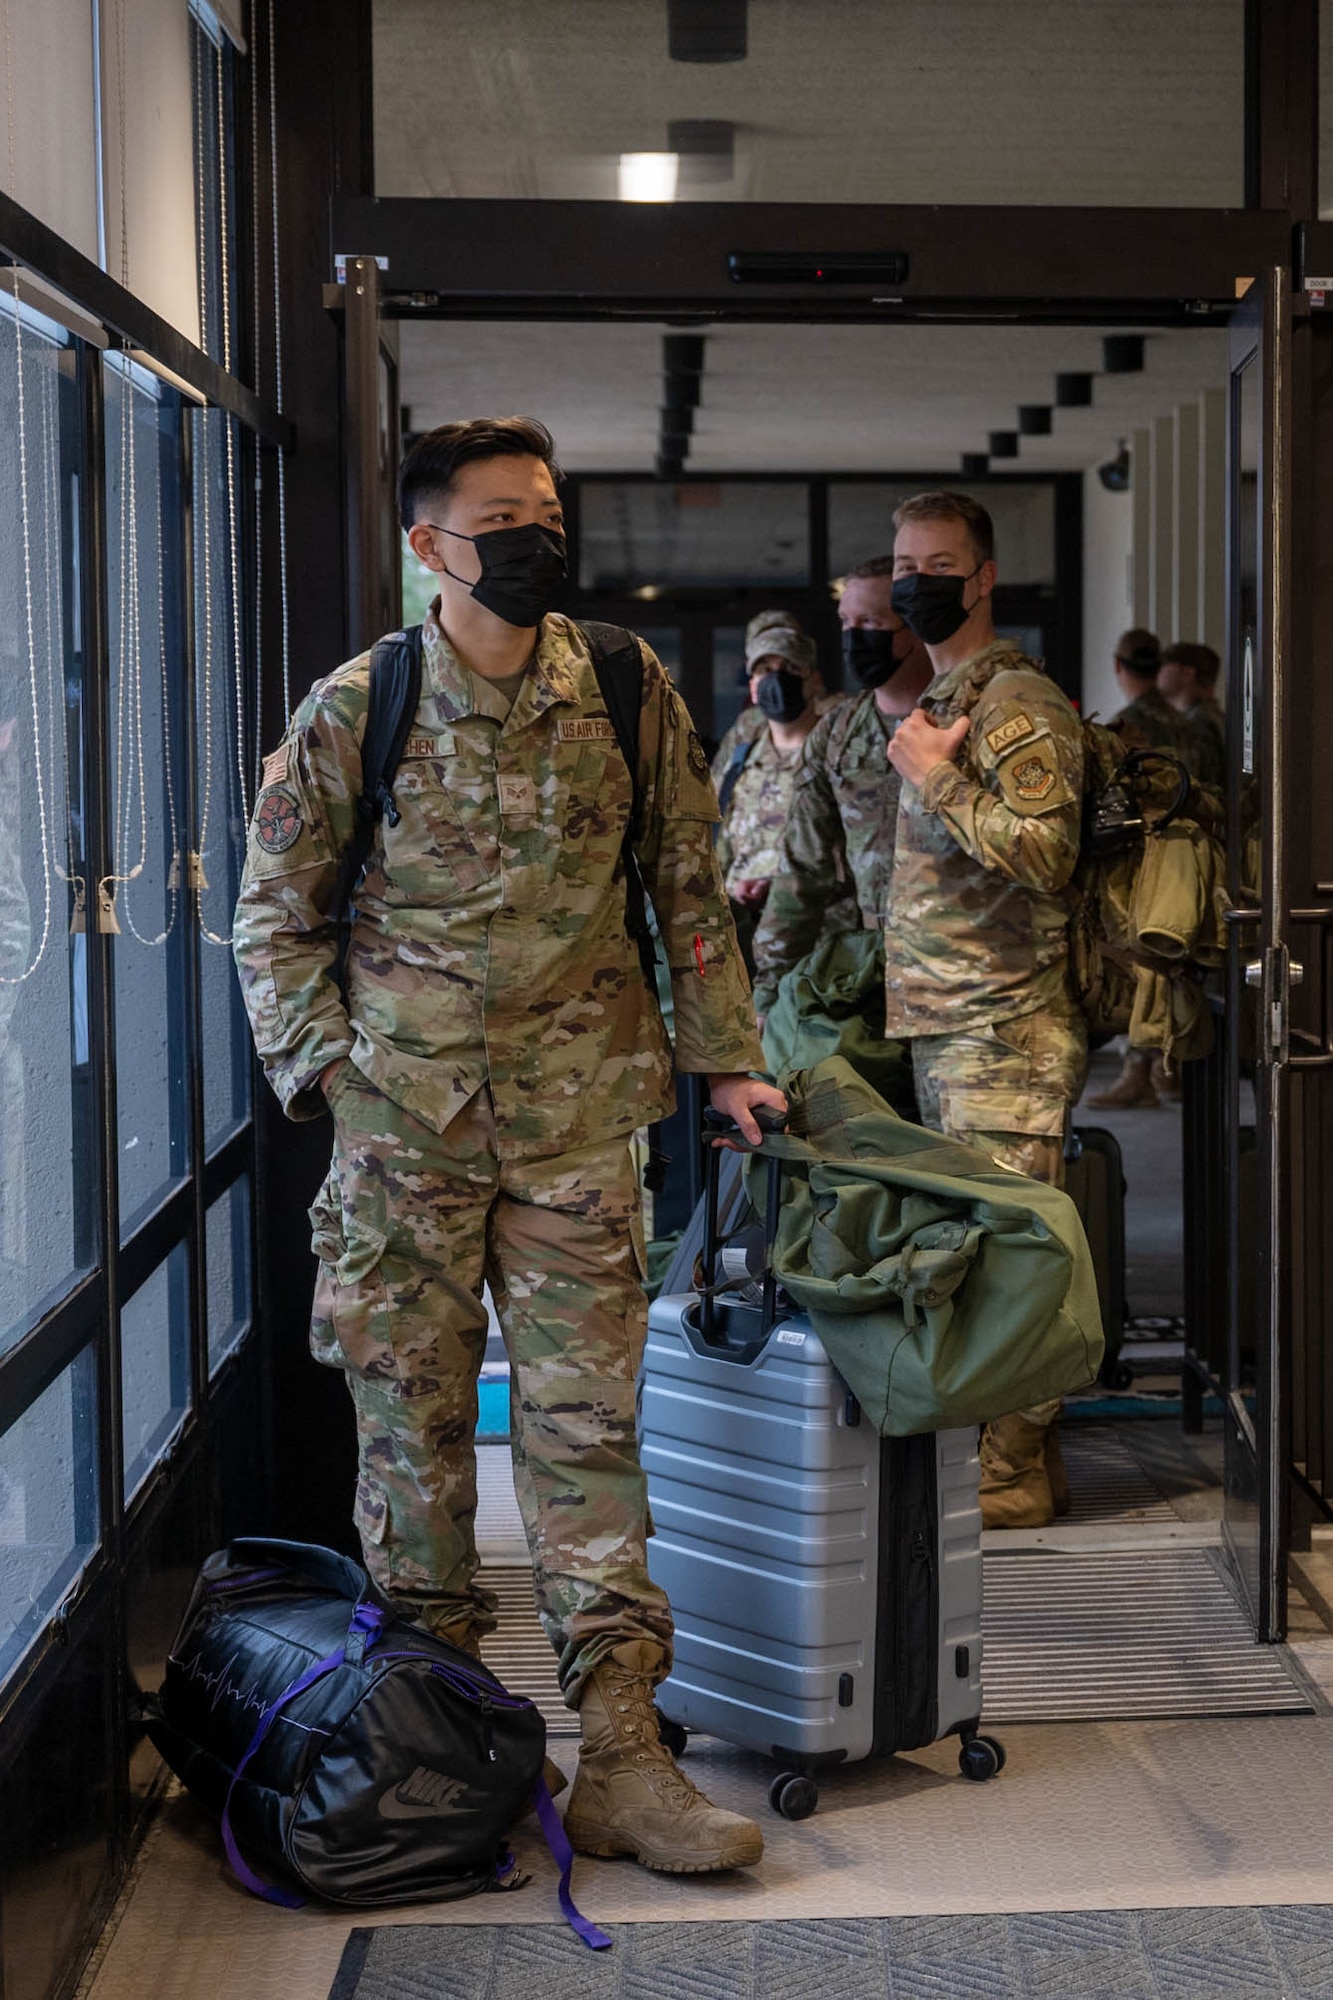 62d AW Airmen deploy in support of U.S. Central Command, U.S. European Command, U.S. Africa Command operations